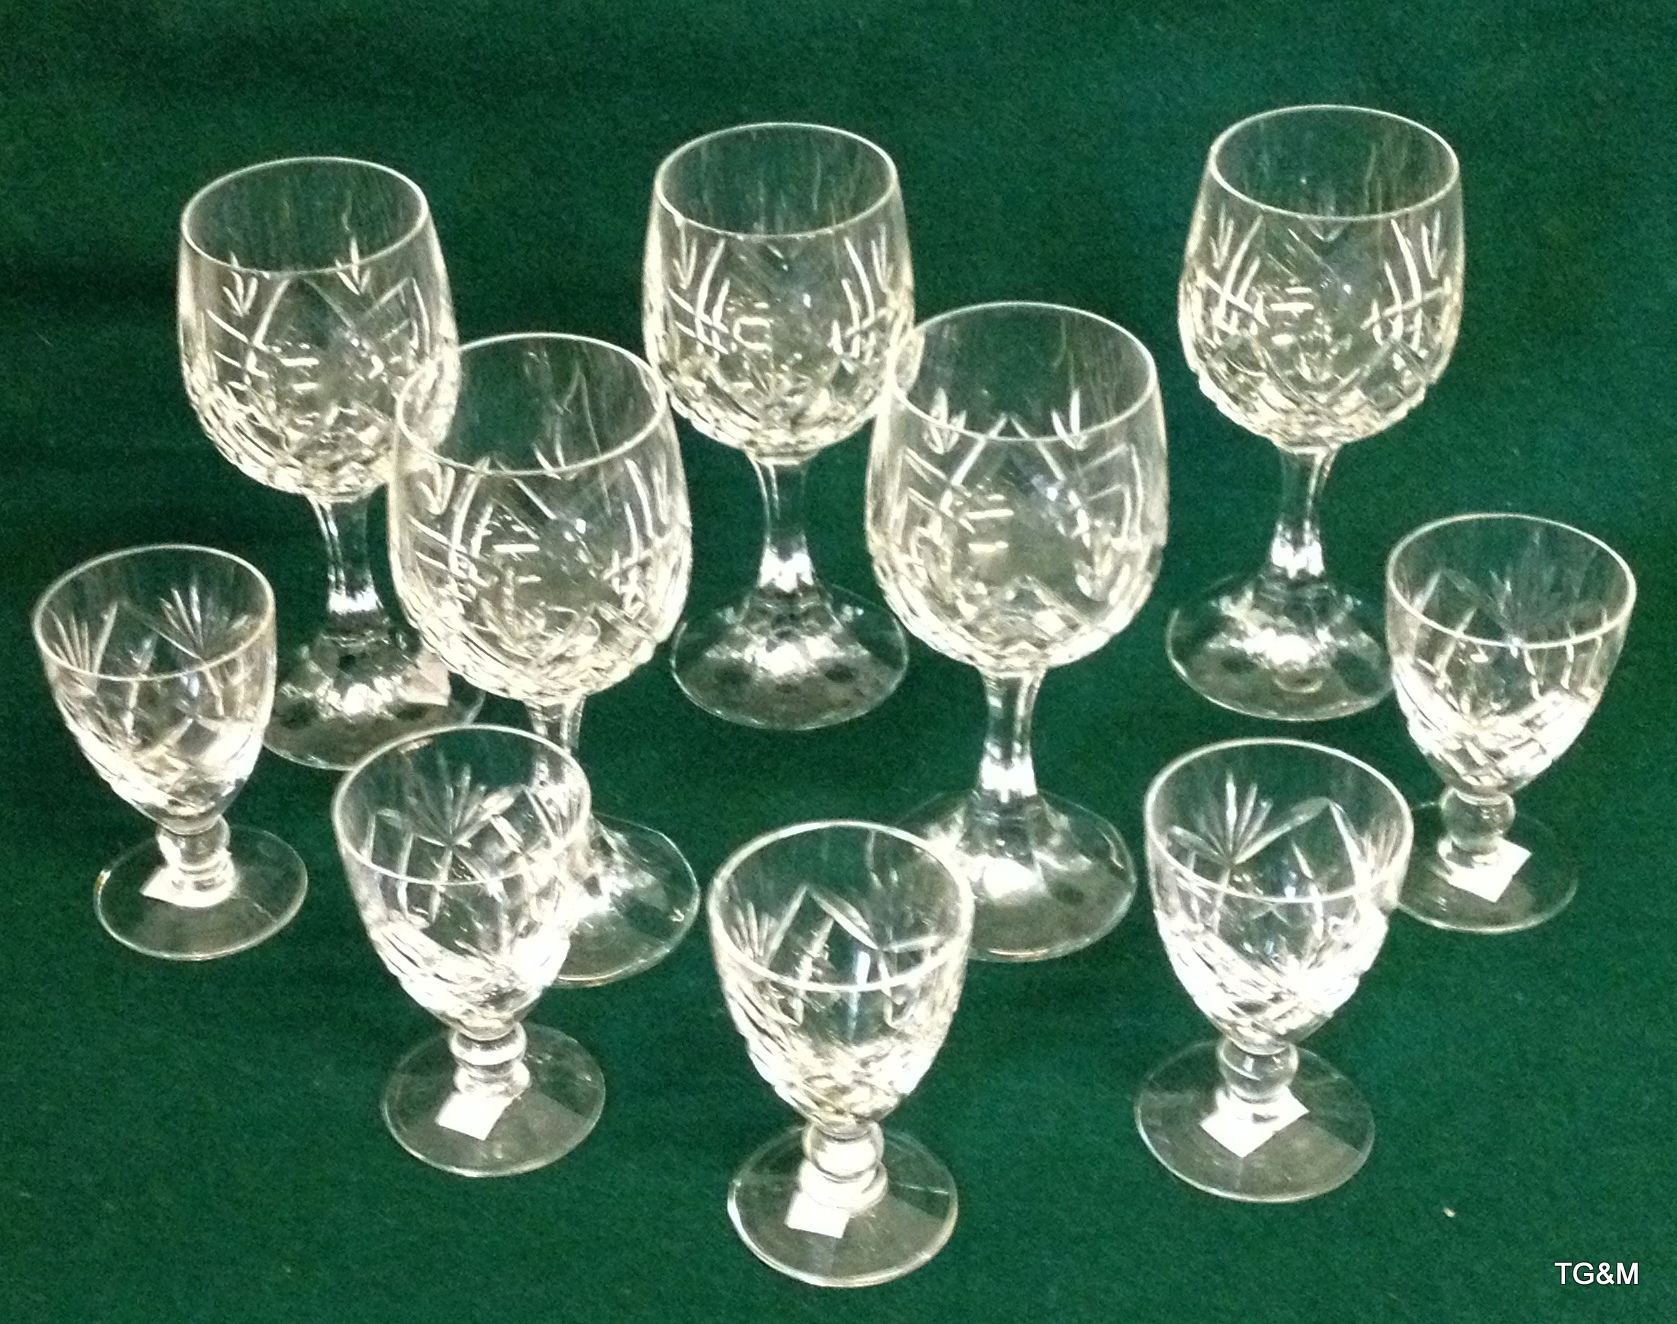 Five of each cut glass wine and sherry glasses